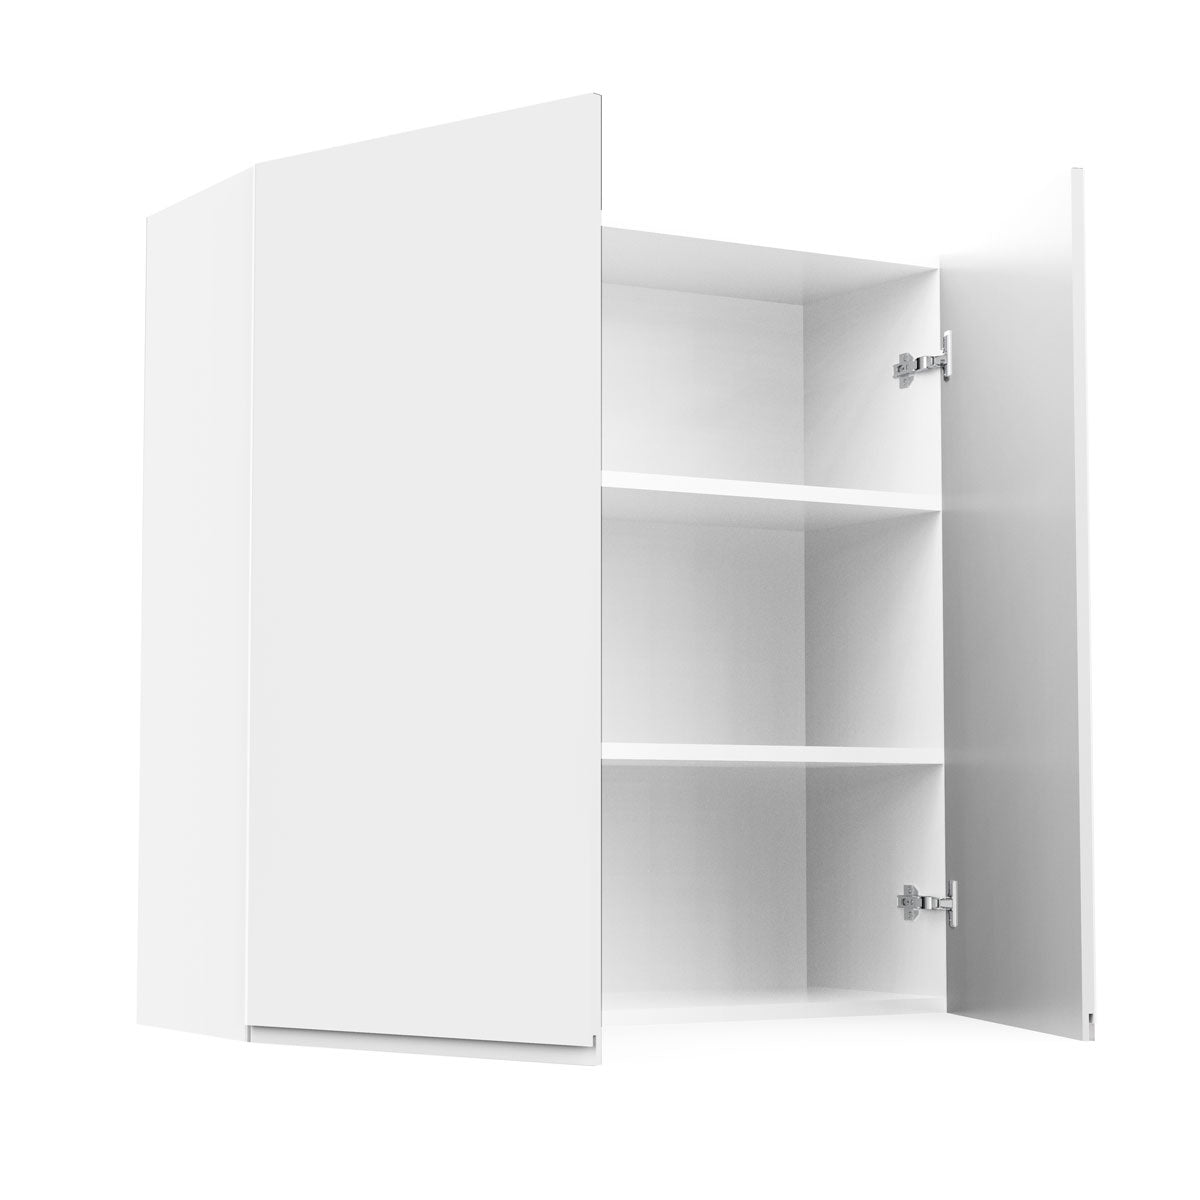 Kitchen Wall Cabinet - RTA - Lacquer white - 2 Door Wall Cabinet | 36"W x 36"H x 12"D